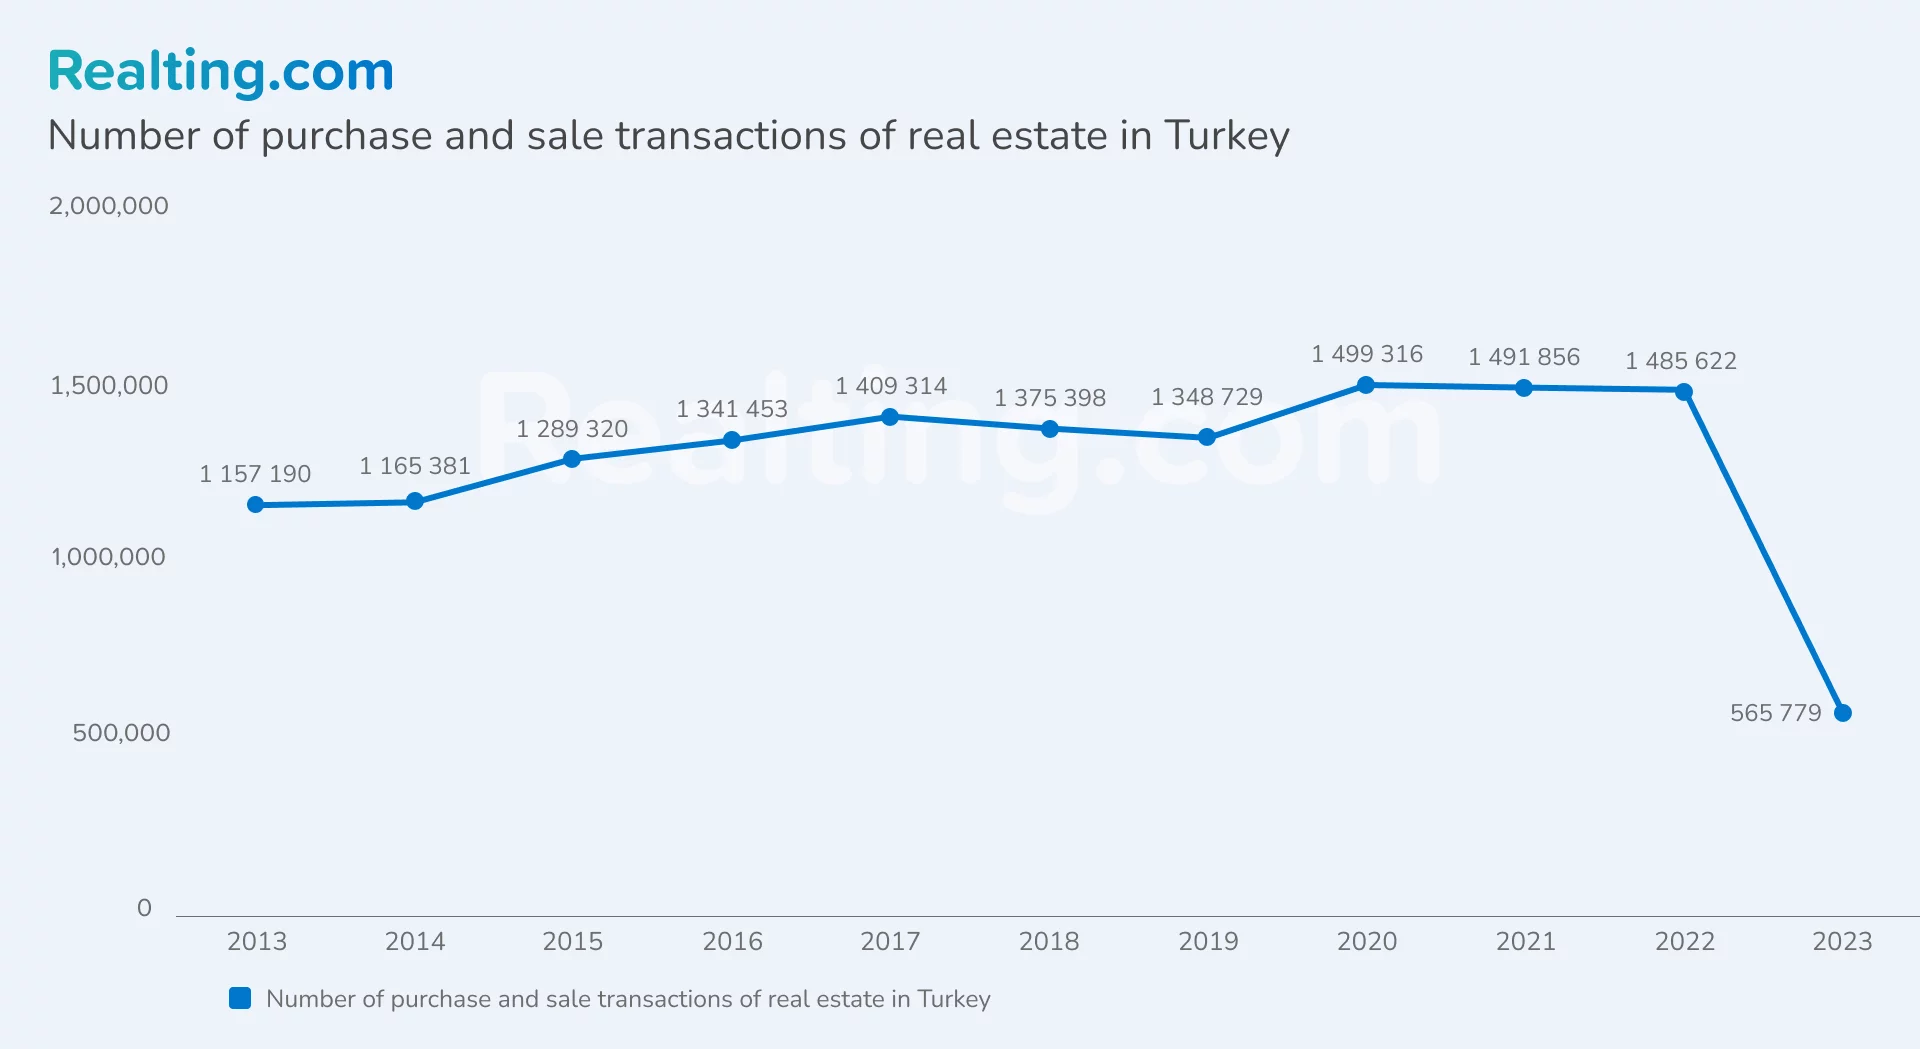 Graph of the number of residential real estate purchase and sale transactions in Turkey